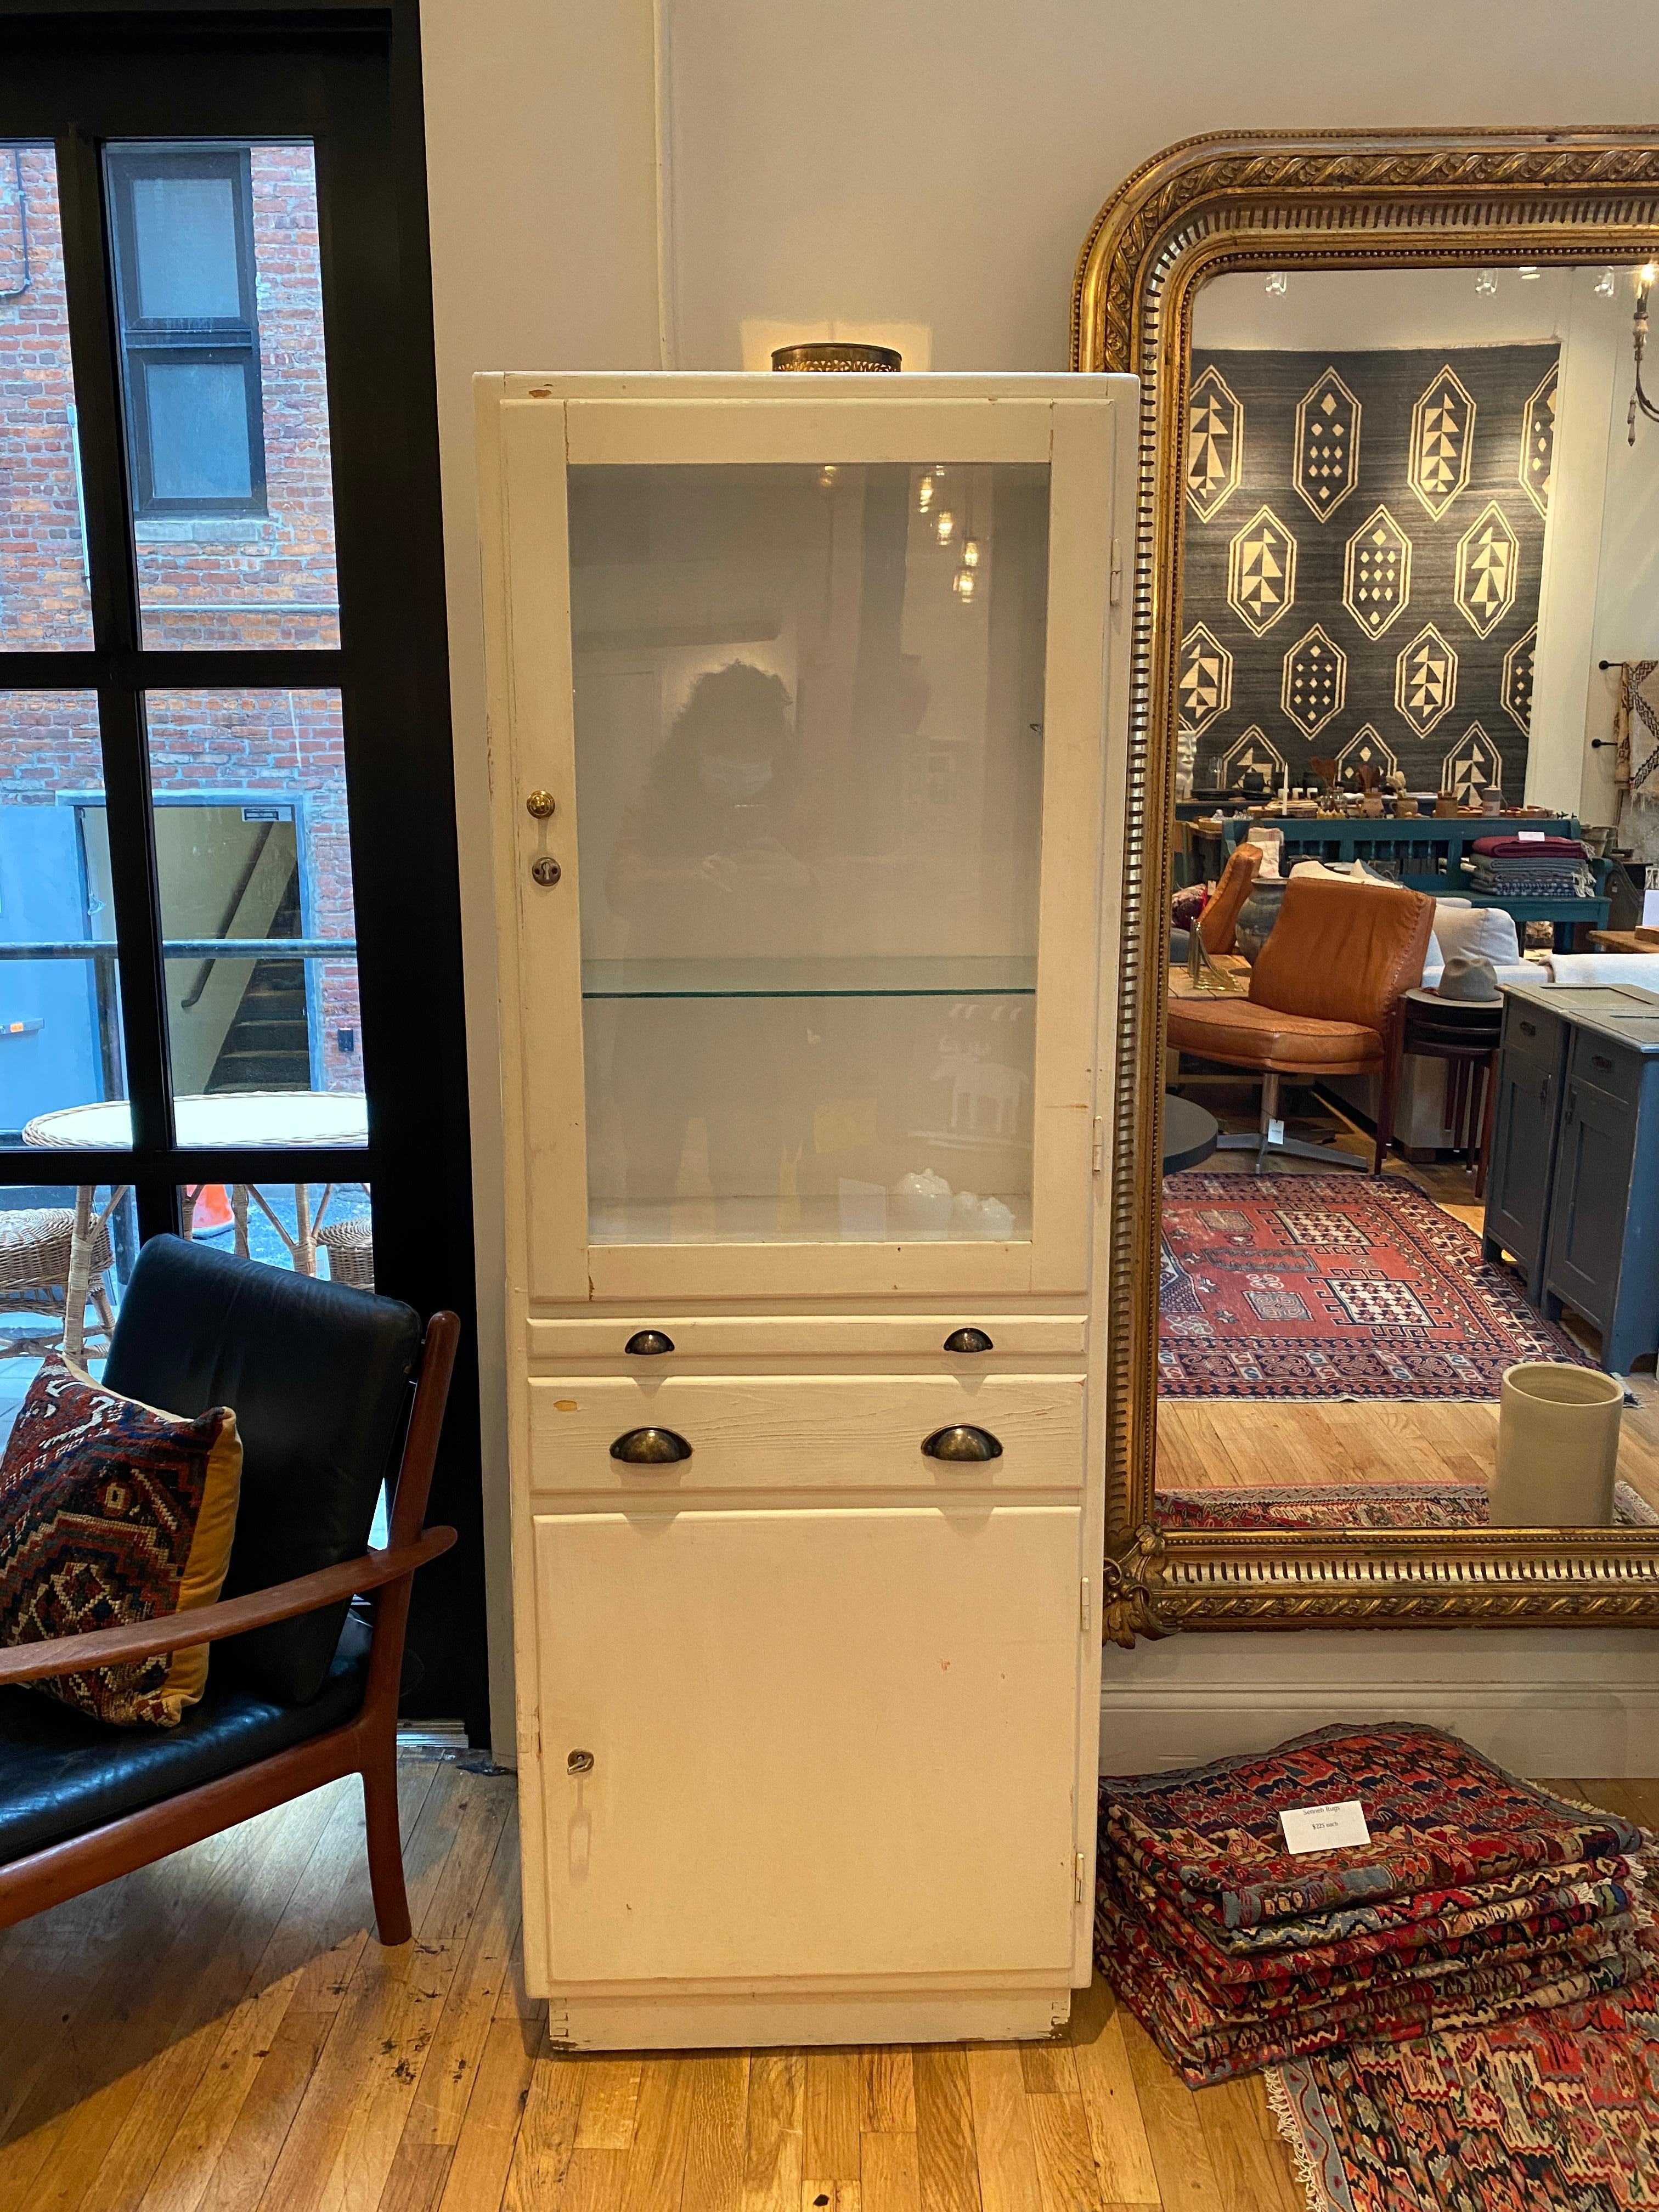 French medicine cabinet with glass shelving in the display area, drawer, and cabinet storage. Perfect for displaying anything your heart desires ranging from antique china to decorative pieces. Endless versatility, can be used in any area of the